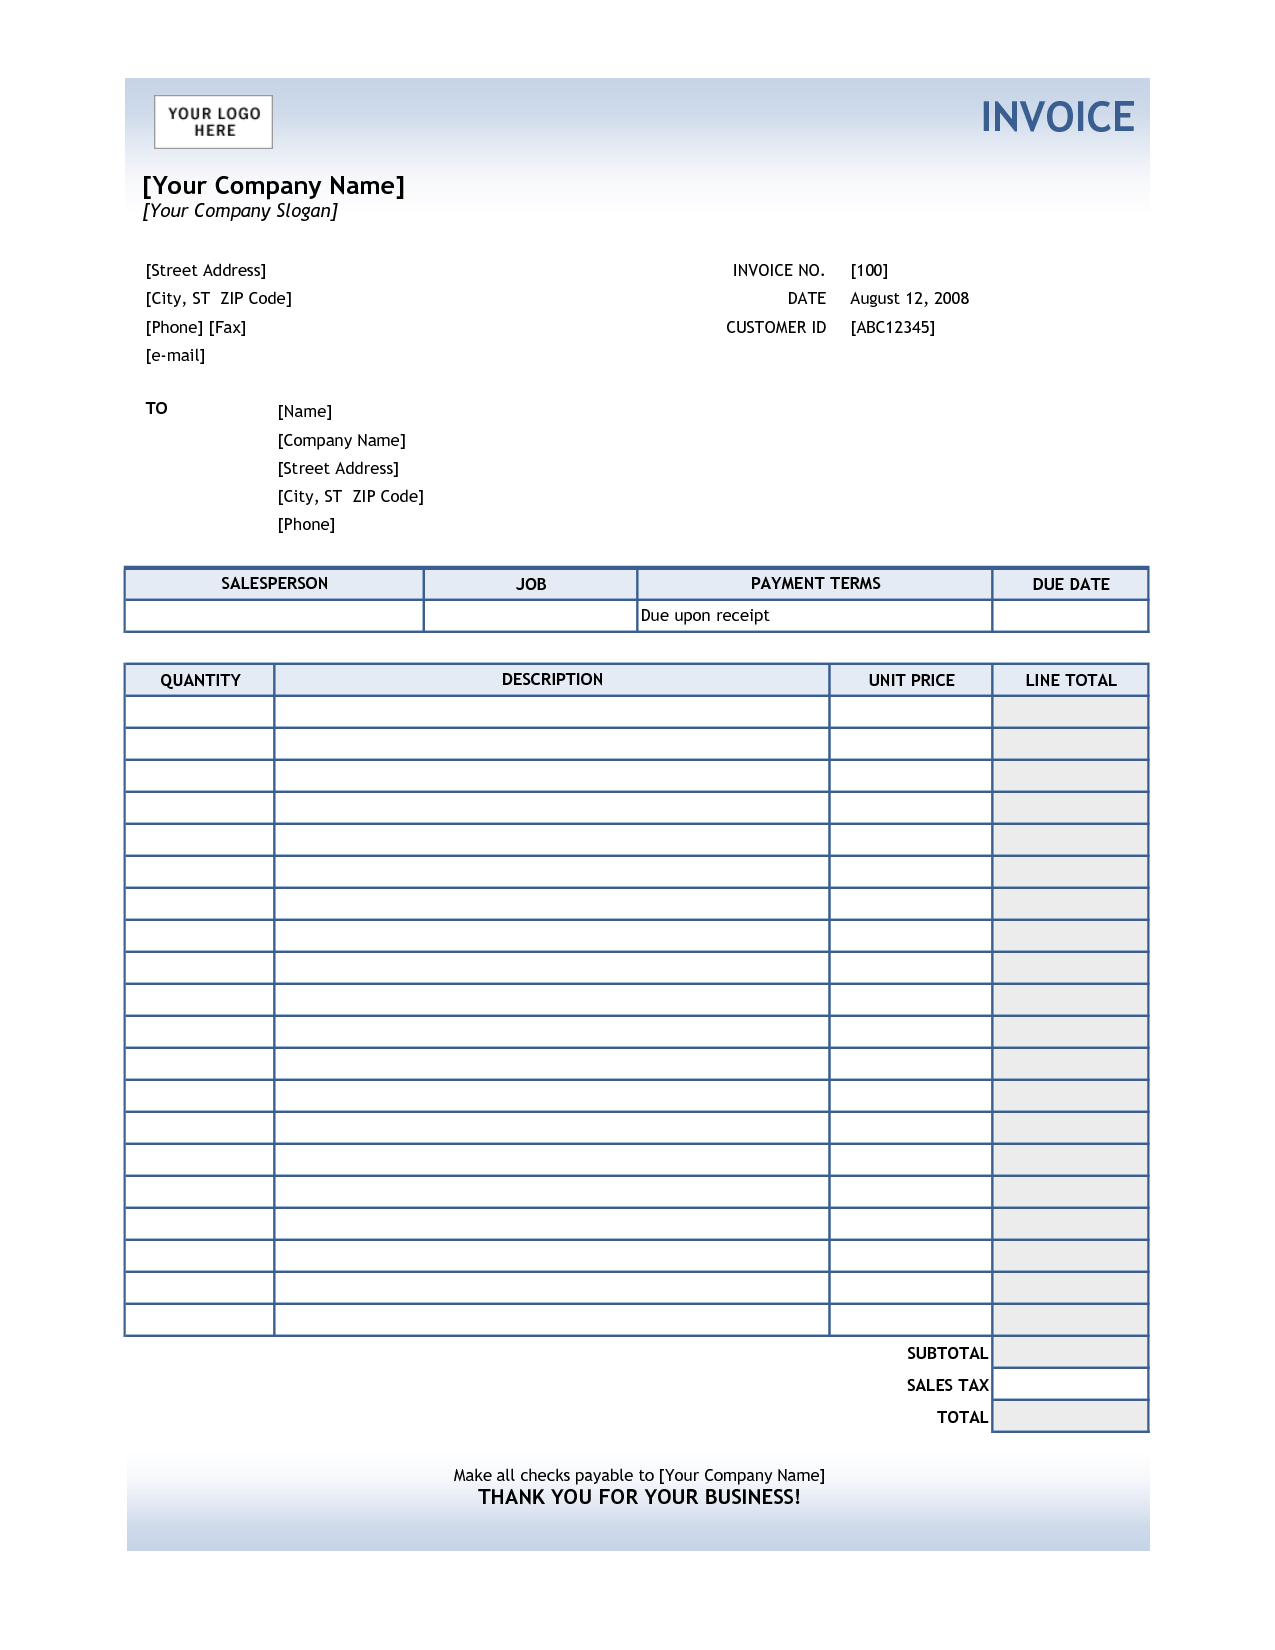 34 INFO CREATE A INVOICE TEMPLATE IN EXCEL FREE DOWNLOAD ZIP DOC PDF 